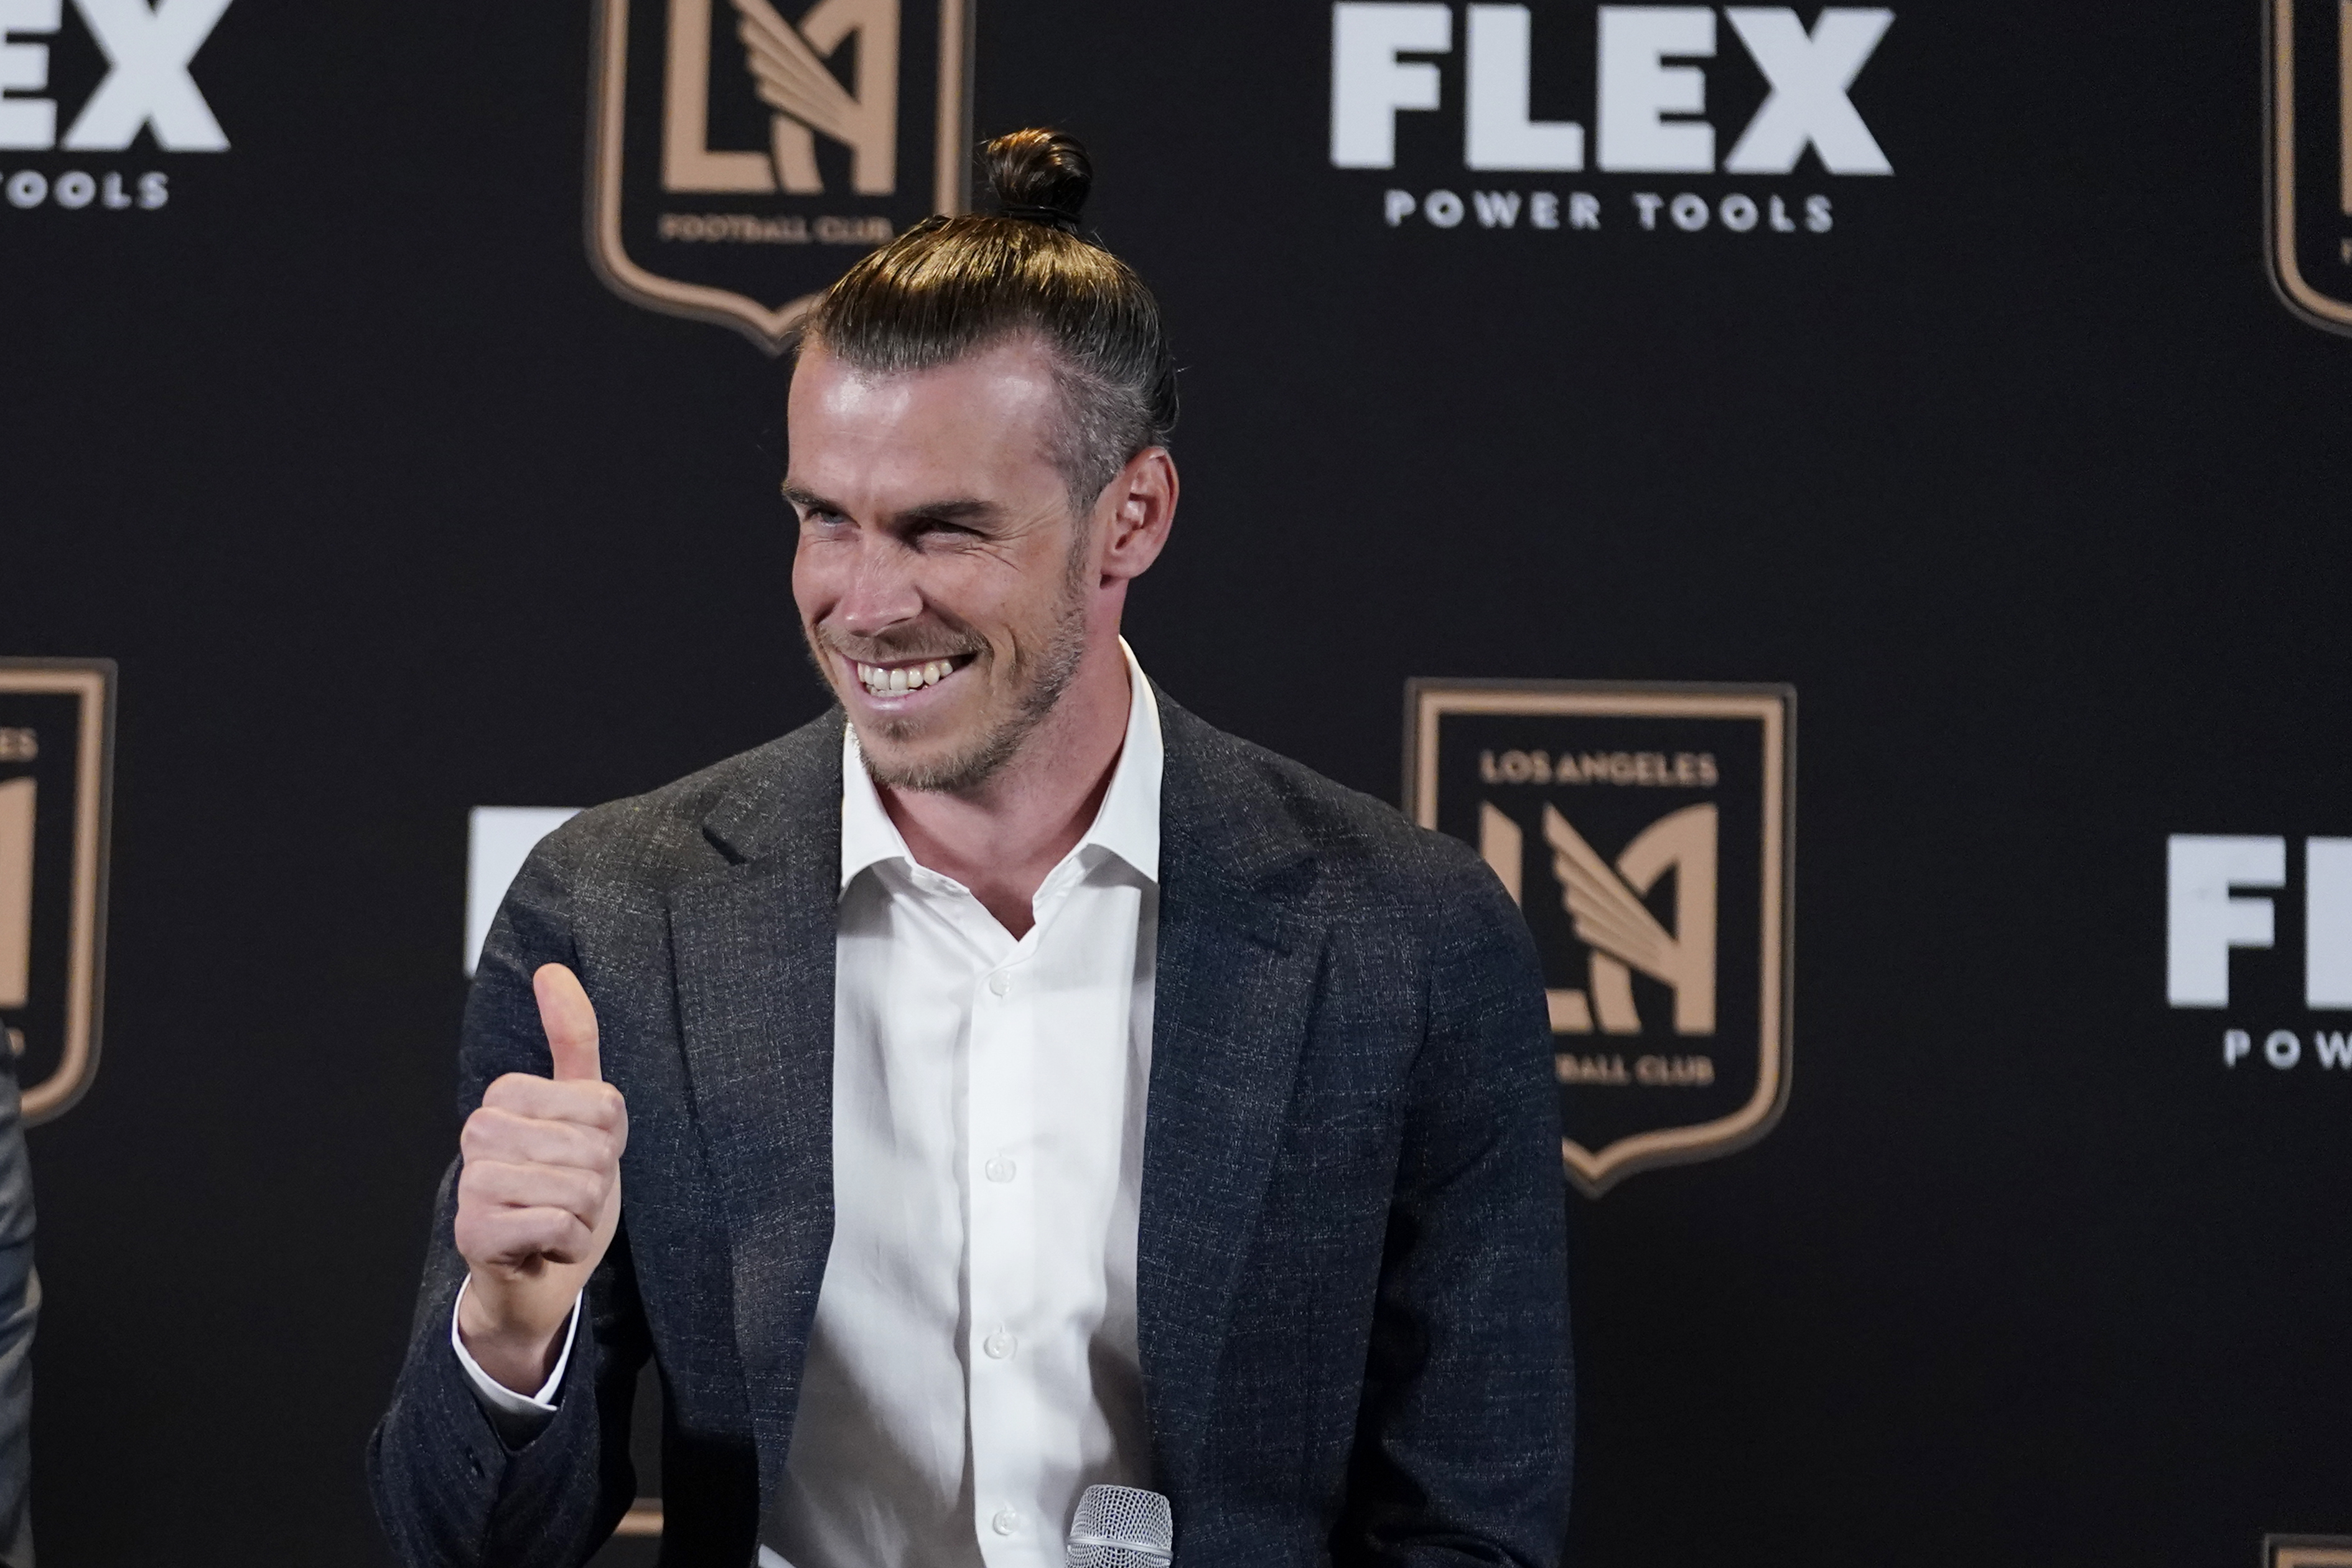 Gareth Bale says he's at LAFC to win trophies, not to retire